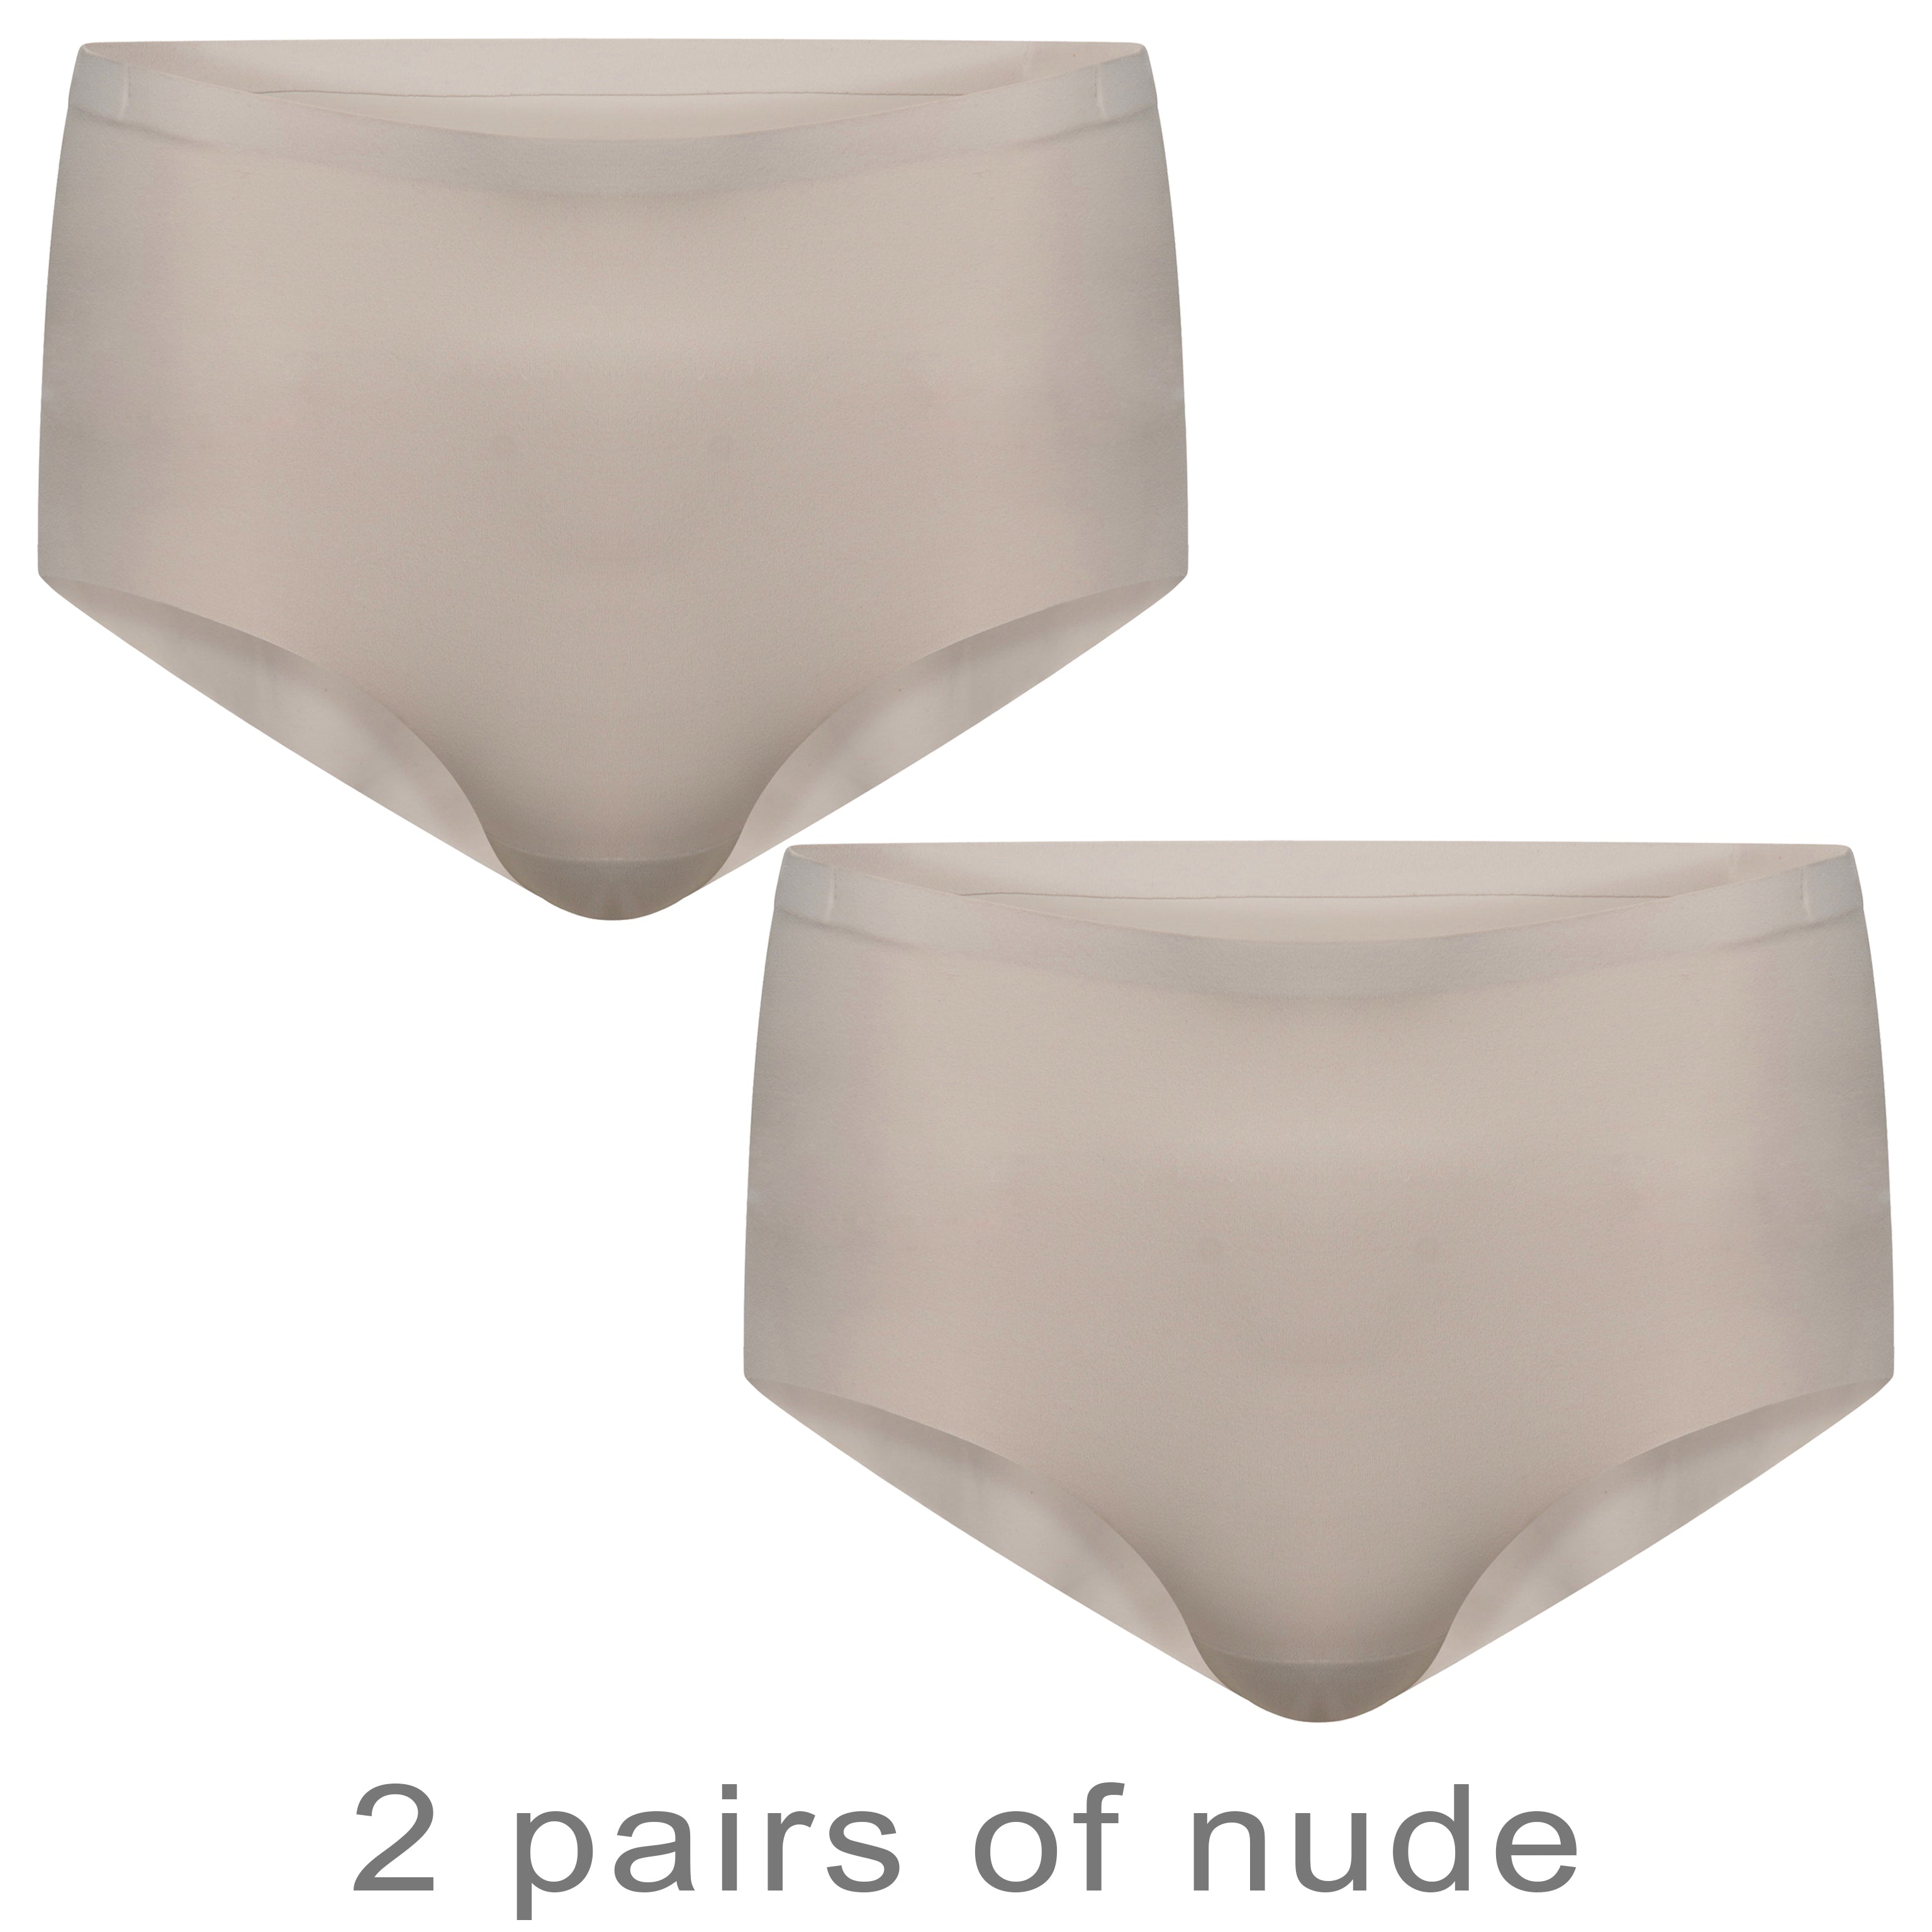 https://justforyouboutique.co.uk/cdn/shop/files/ladies-nude-seamless-seamfree-no-vpl-knickers-briefs-in-uk-size-8-10-just-for-you-boutique.jpg?v=1695633934